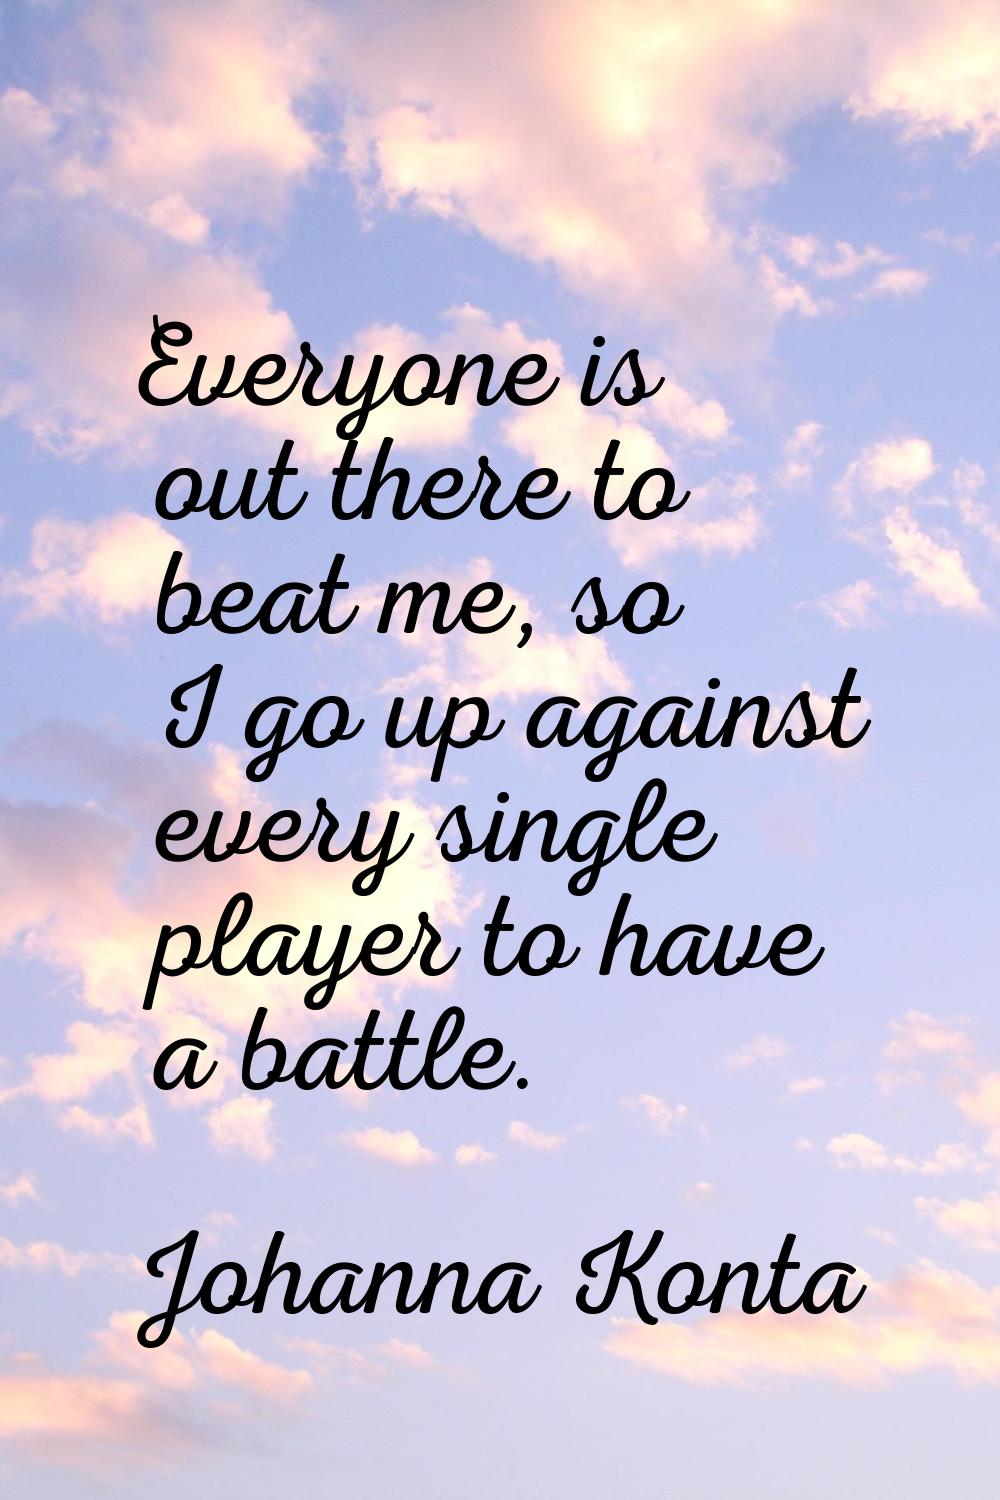 Everyone is out there to beat me, so I go up against every single player to have a battle.